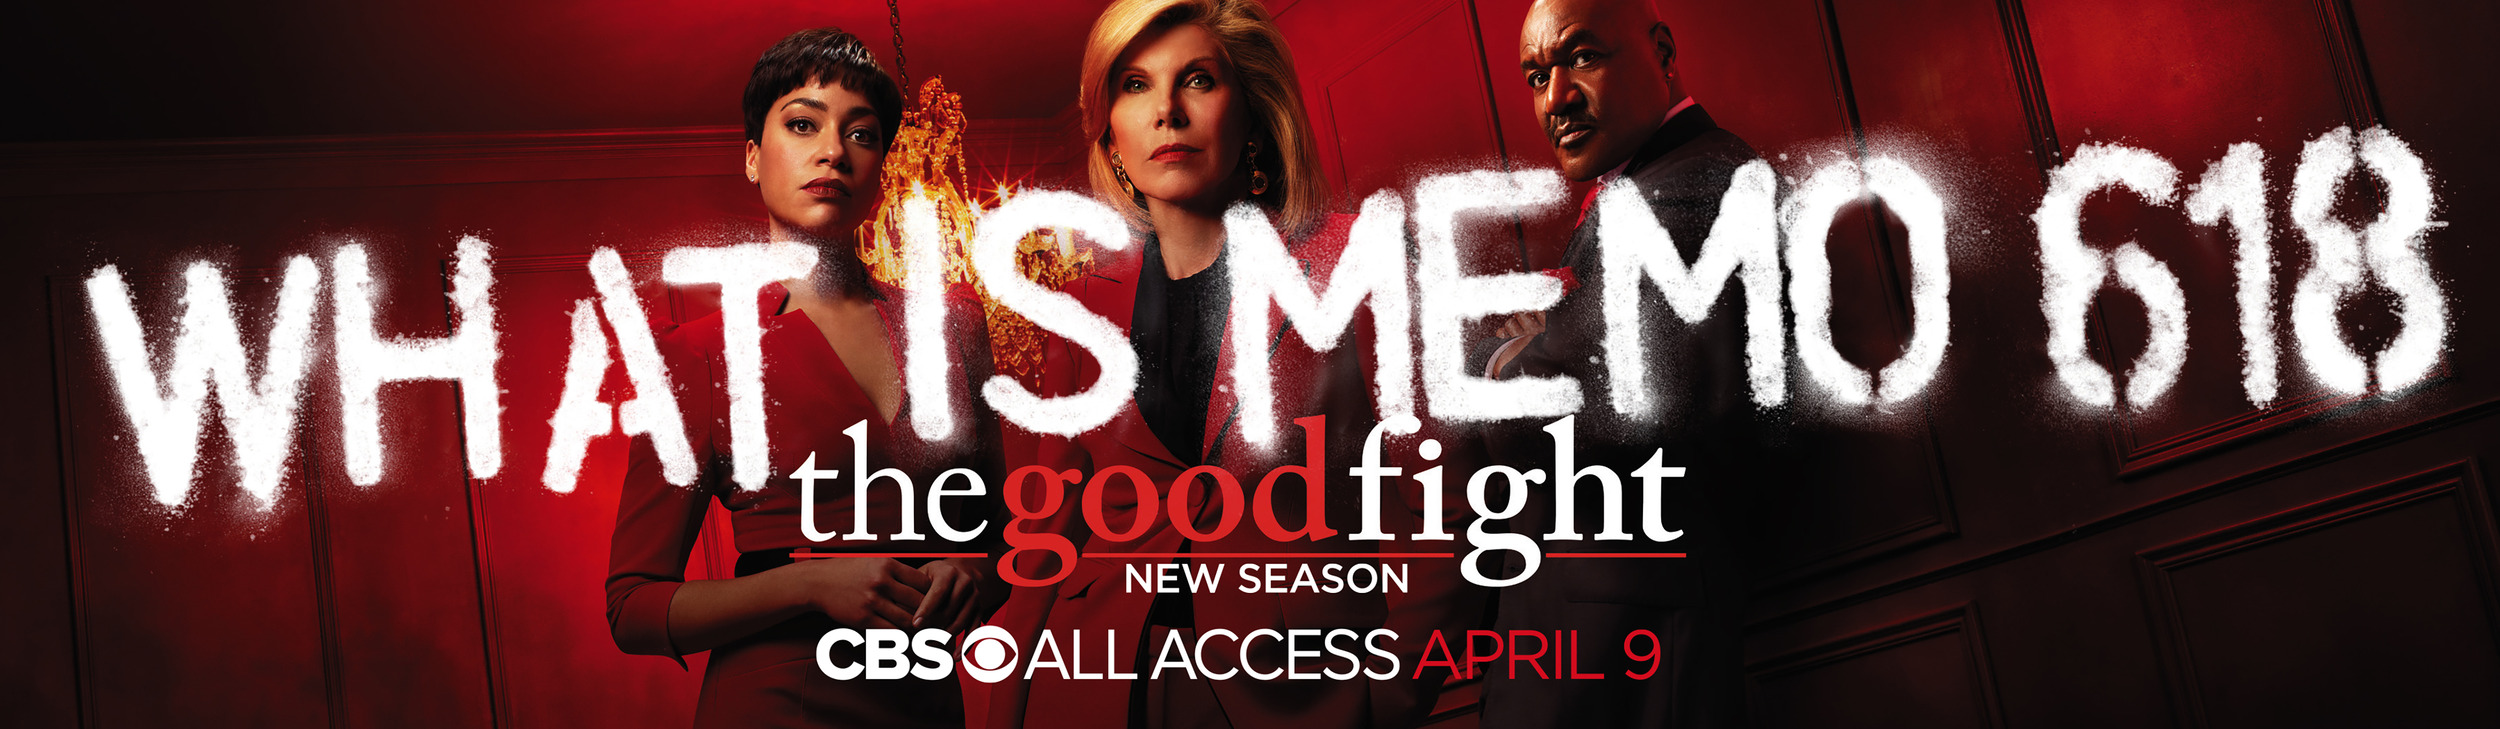 Mega Sized Movie Poster Image for The Good Fight (#16 of 17)